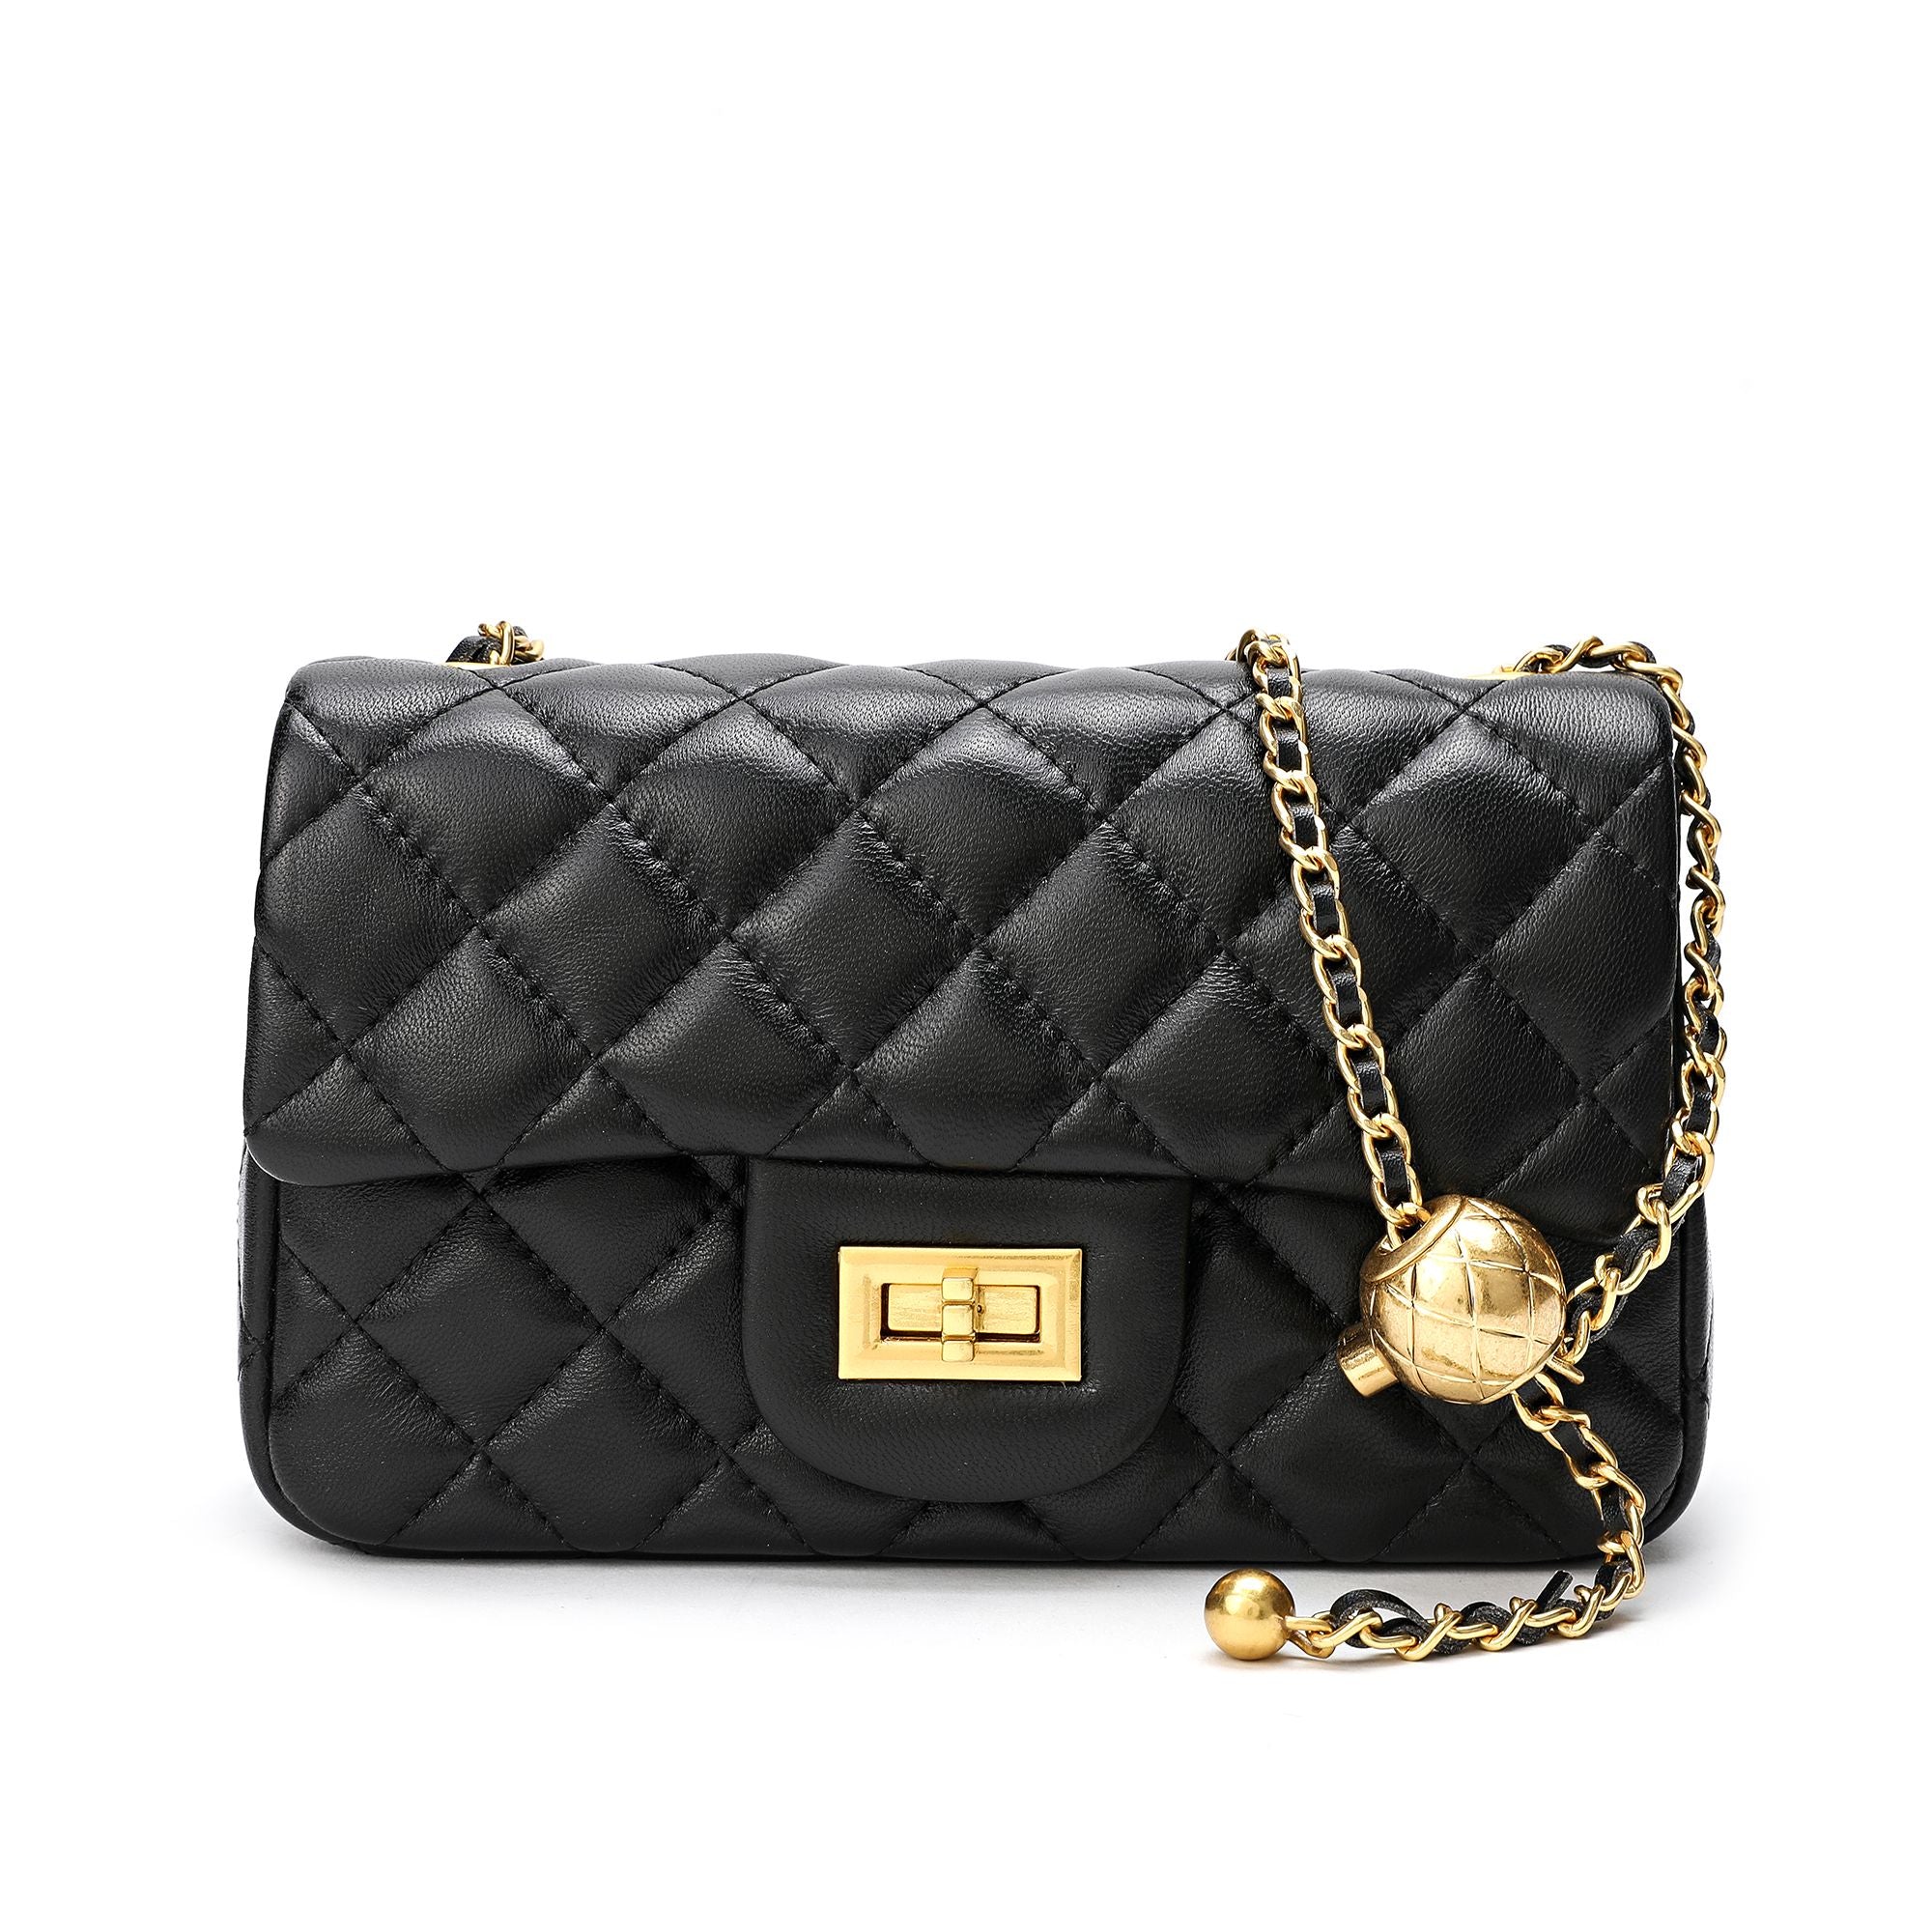 Quilted Mini Crossbody Wristlet Clutch